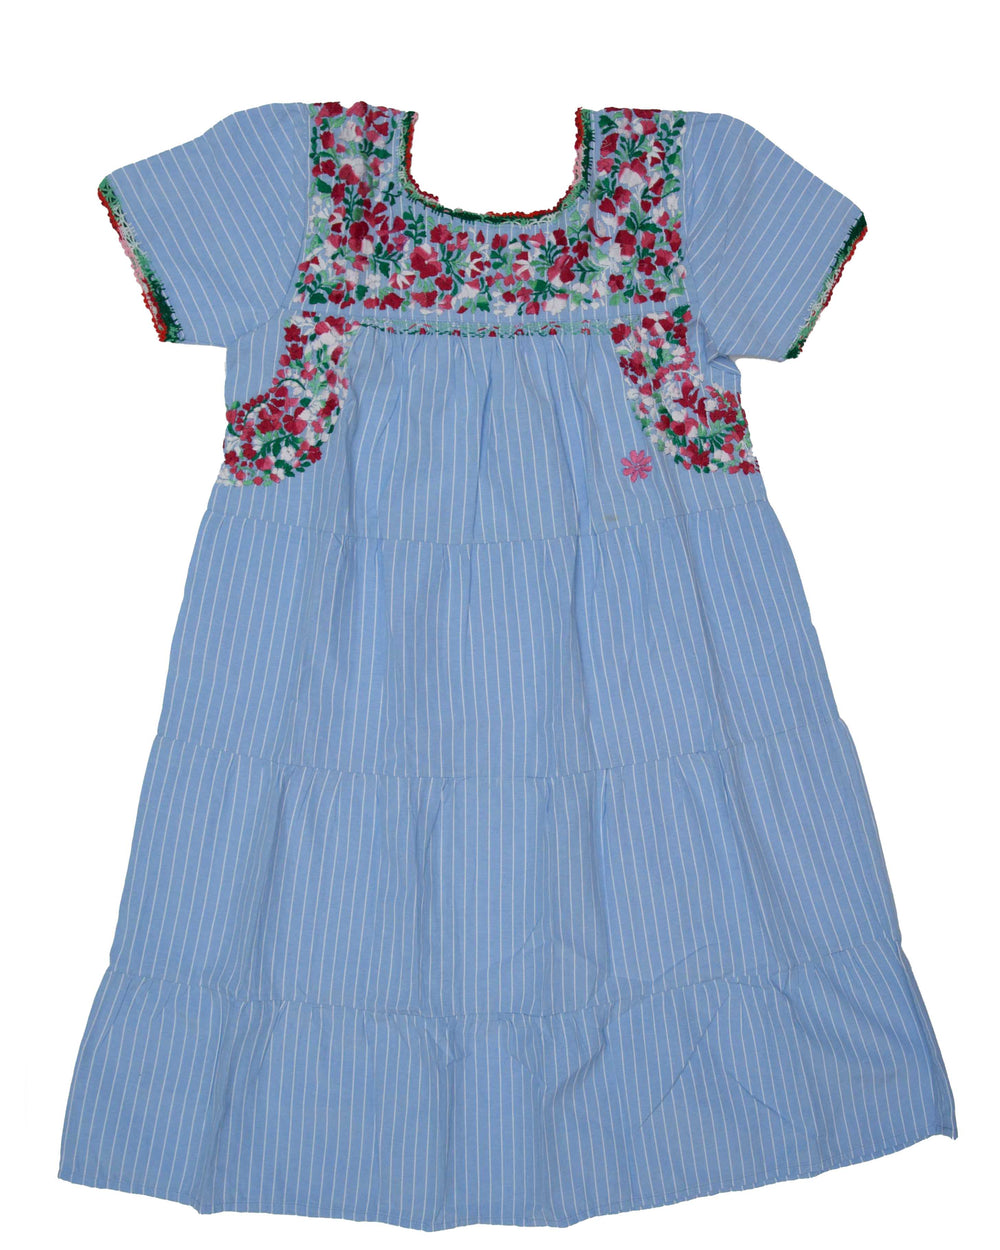 Girls Gabriela Dress | Blue & White Stripes with Red Ombre